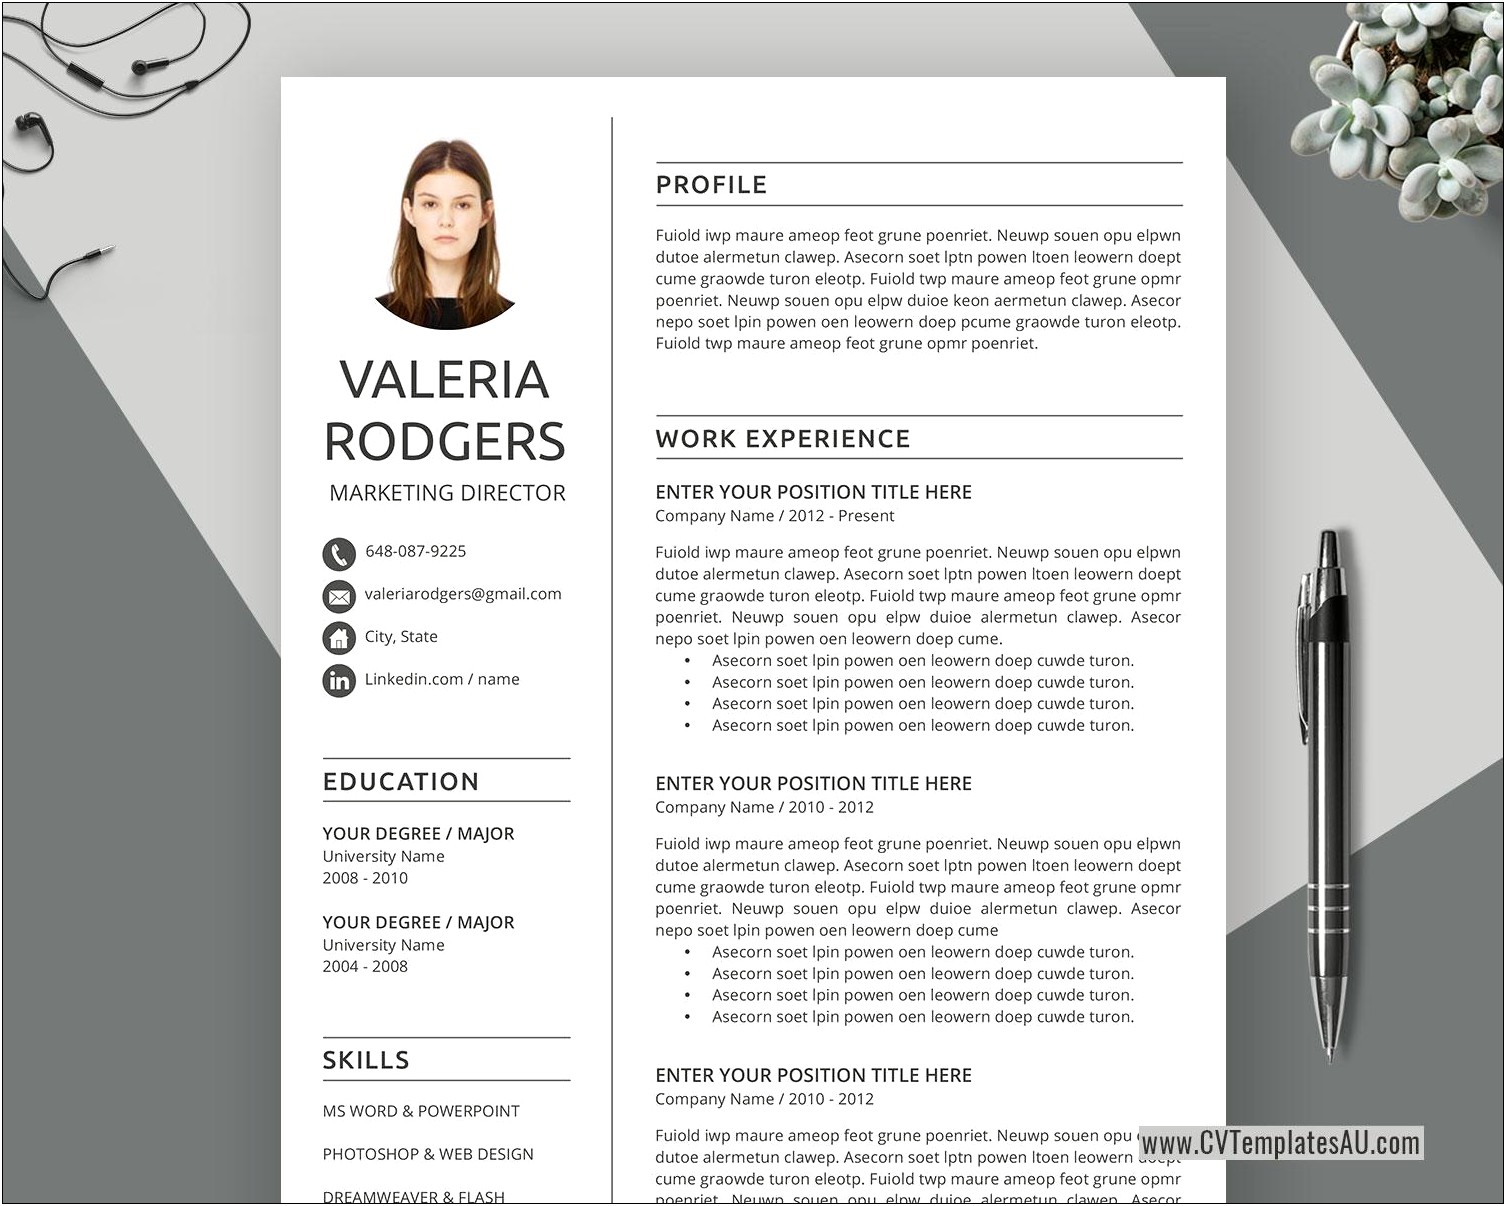 Best Resume Template For Jobs Usa